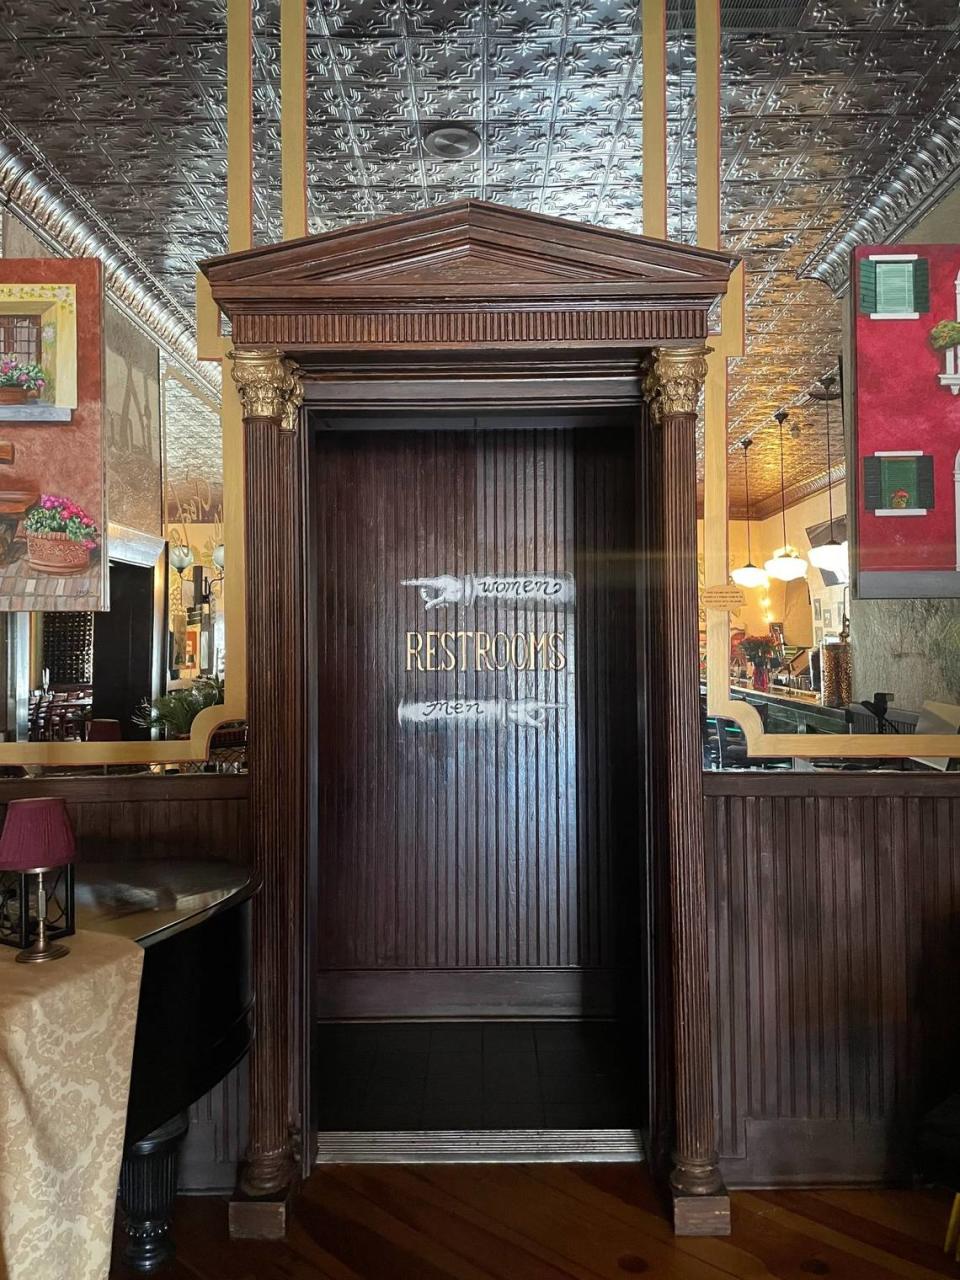 The doorway to the restrooms is one salvaged from the hotel before demolition. Dino Thompson, Myrtle Beach historian and owner of former Cagney’s incorporated parts of the hotel into the restaurant building.